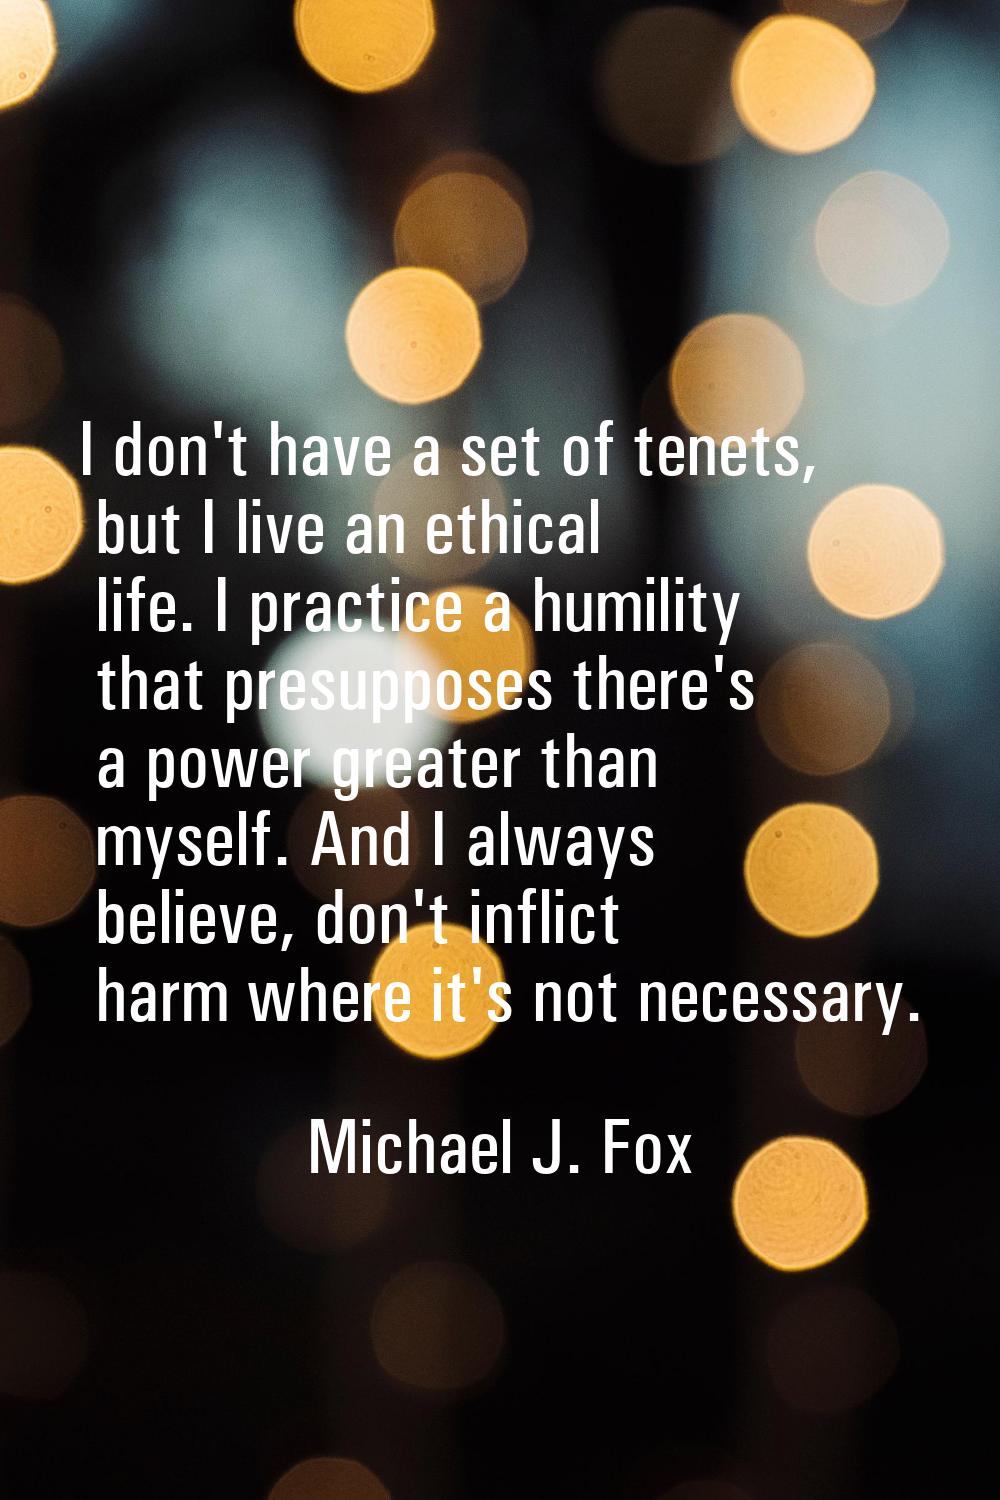 I don't have a set of tenets, but I live an ethical life. I practice a humility that presupposes th